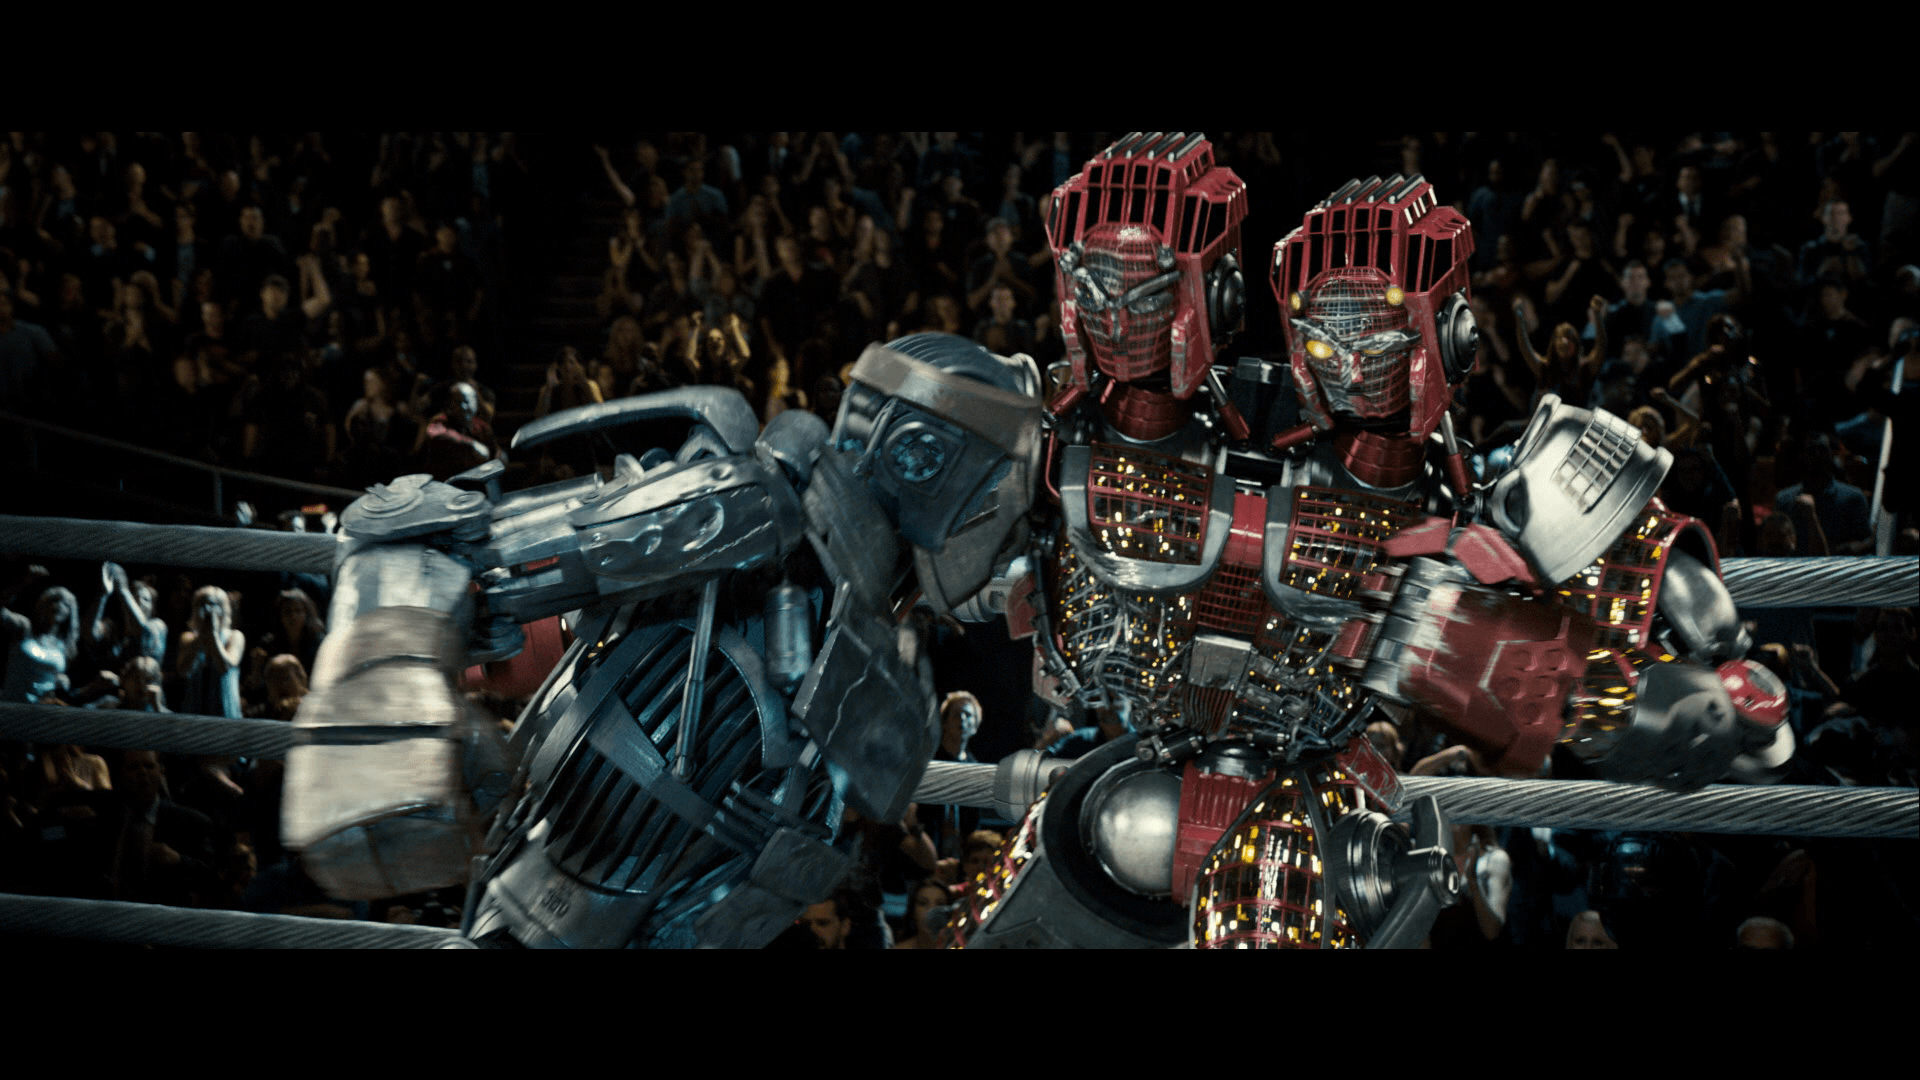 image about real steel. World and Pop culture